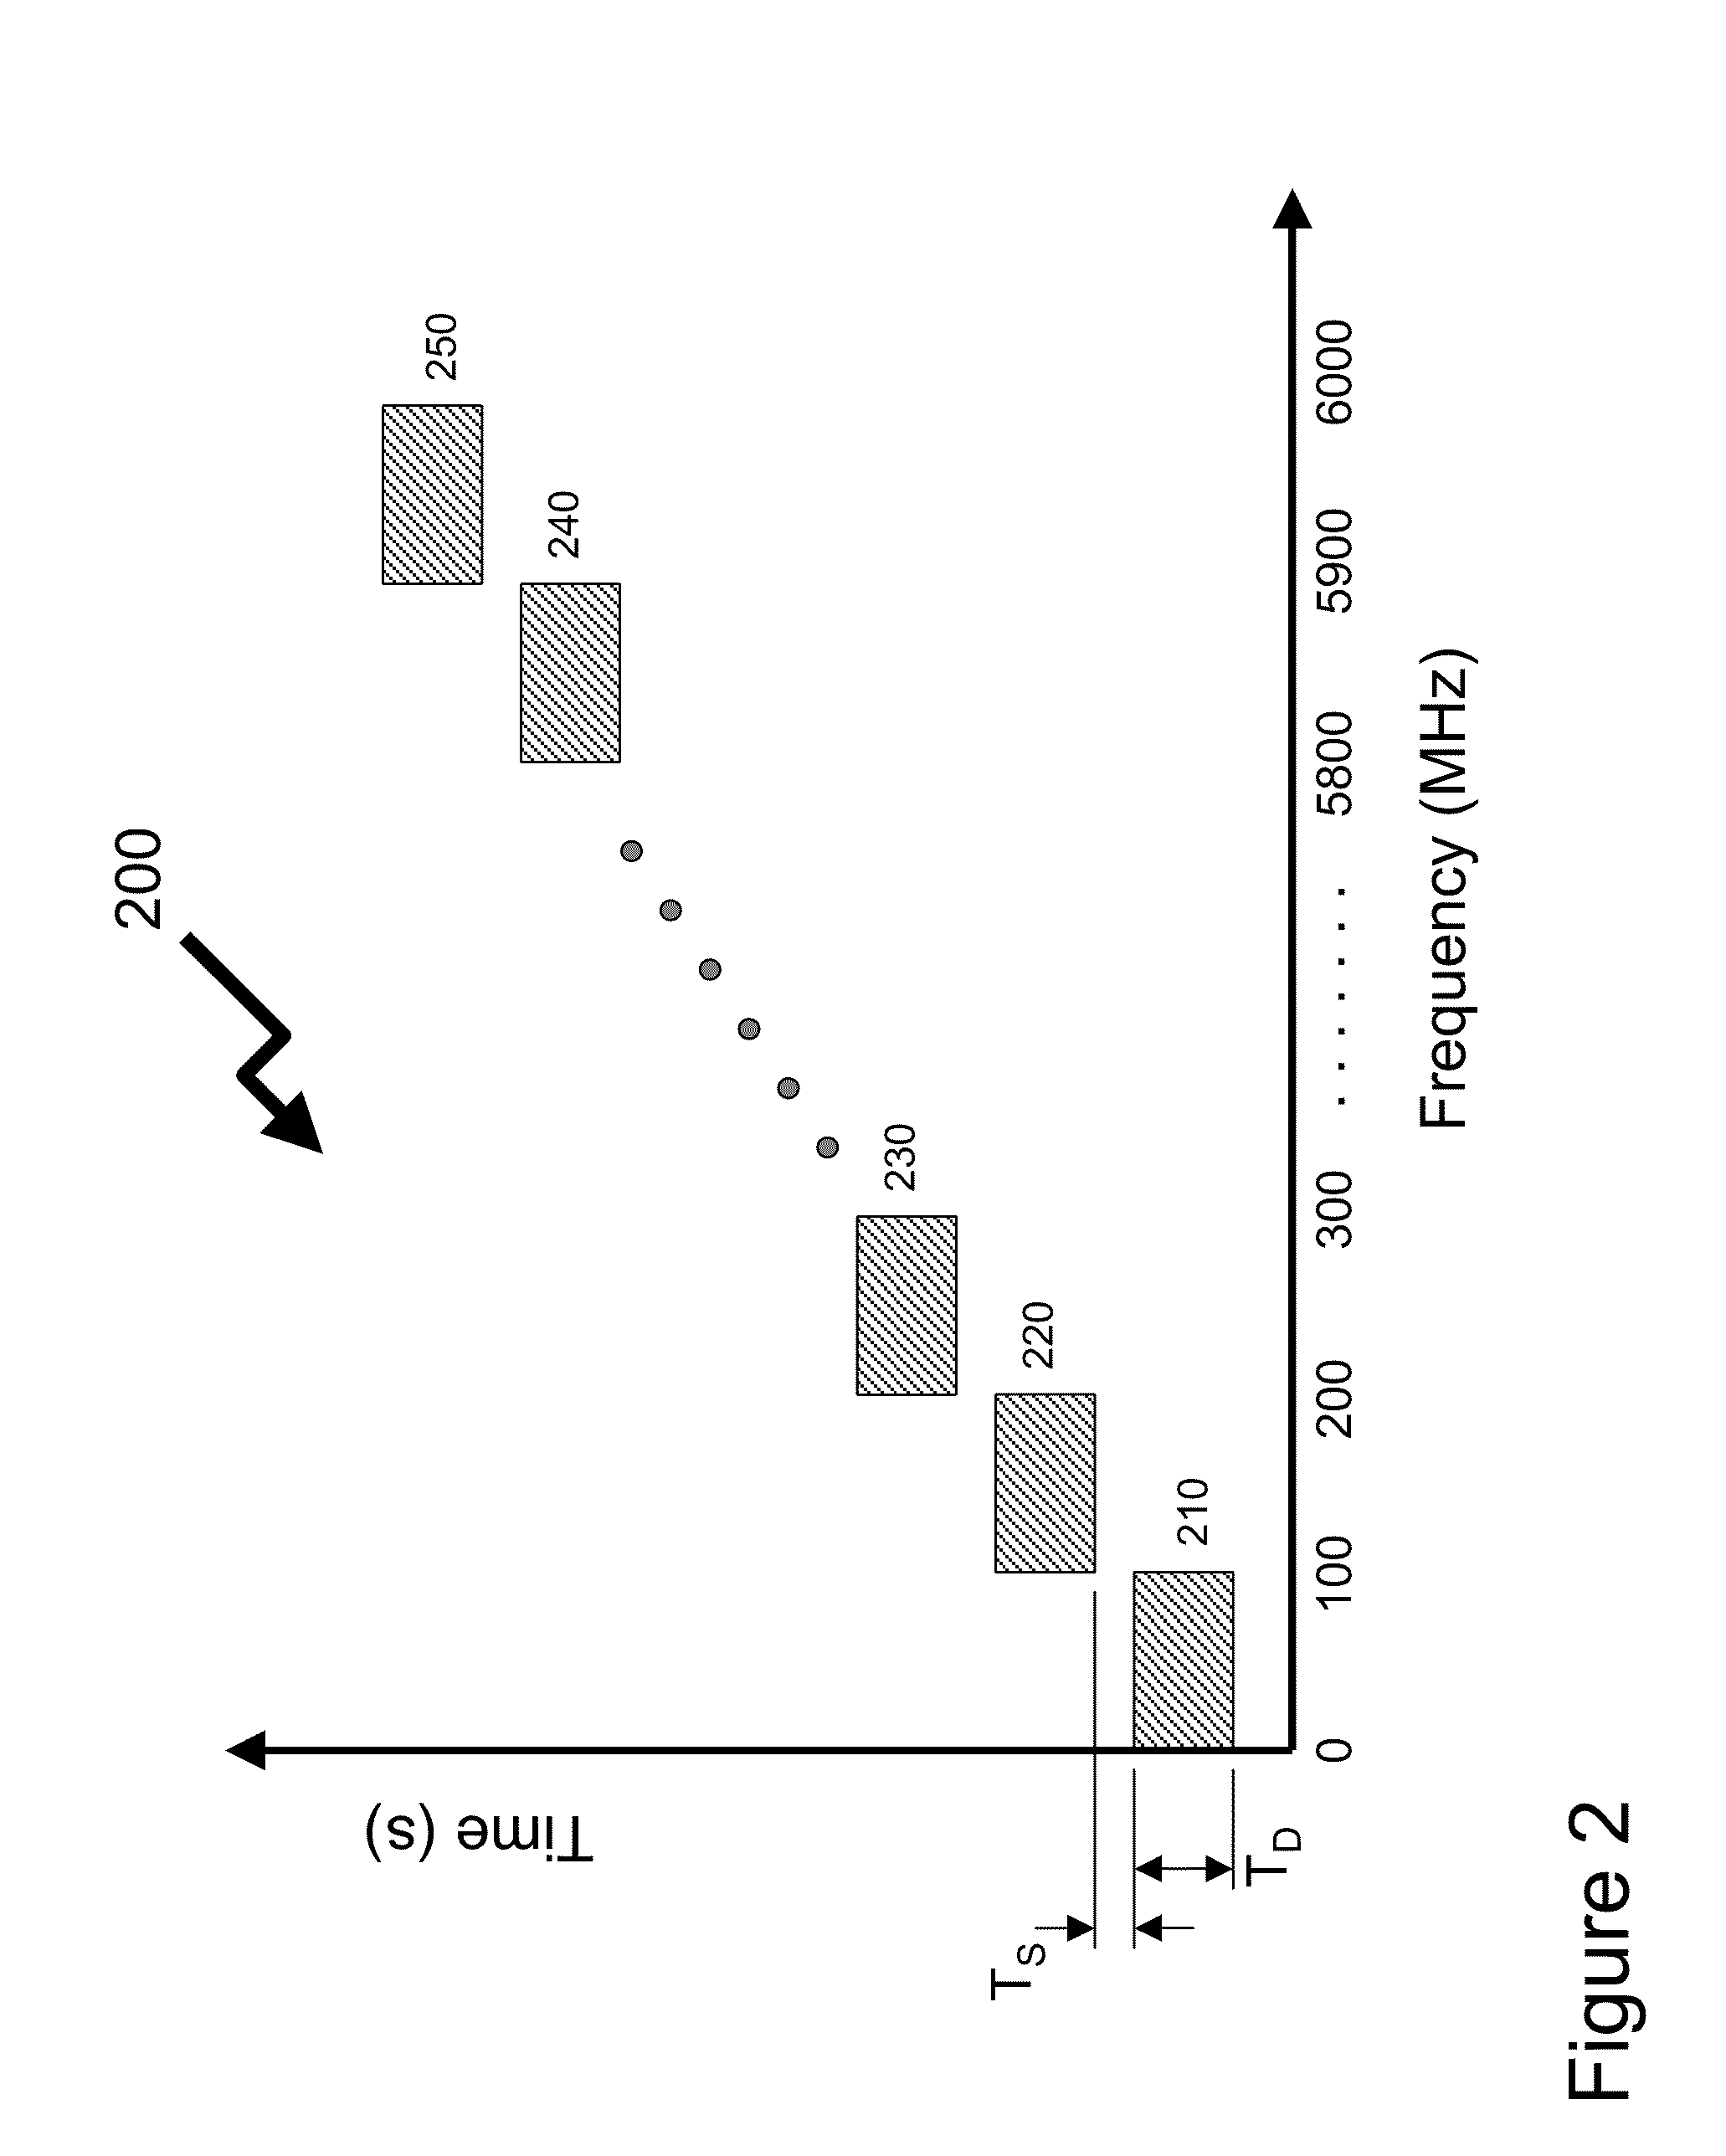 System and method for detecting RF transmissions in frequency bands of interest across a geographic area